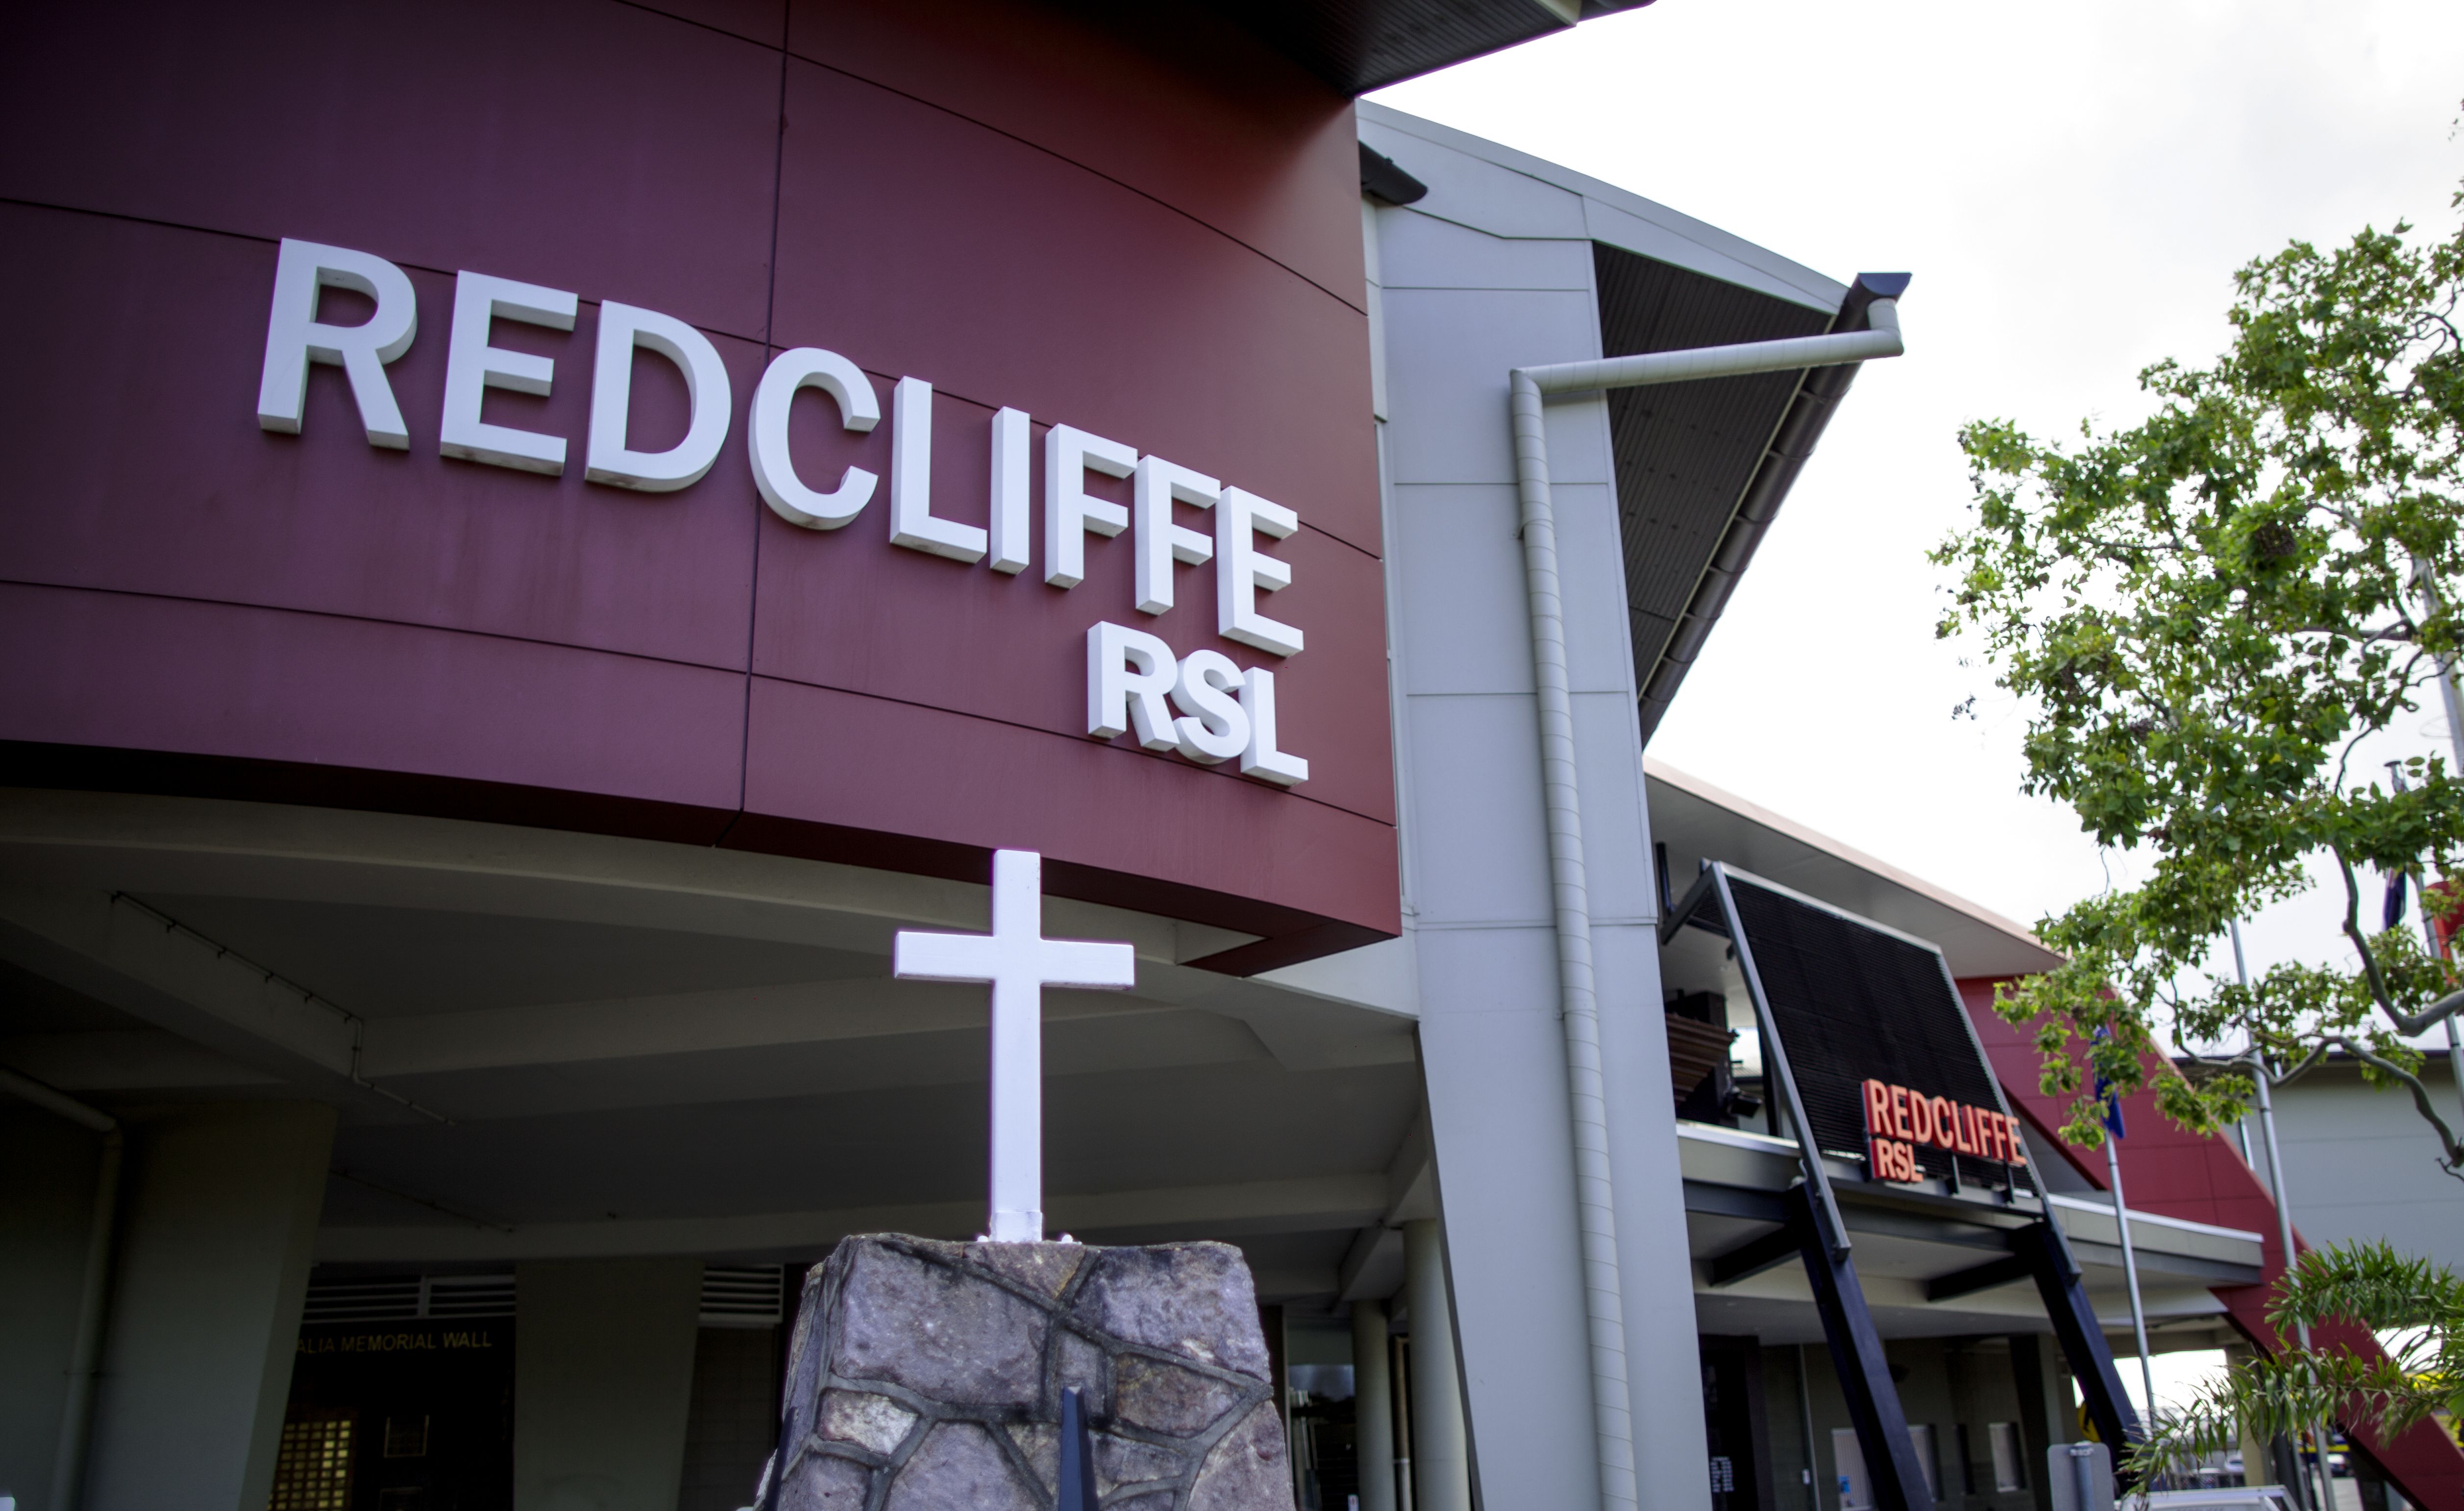 Redcliffe RSL Fabricated Letters